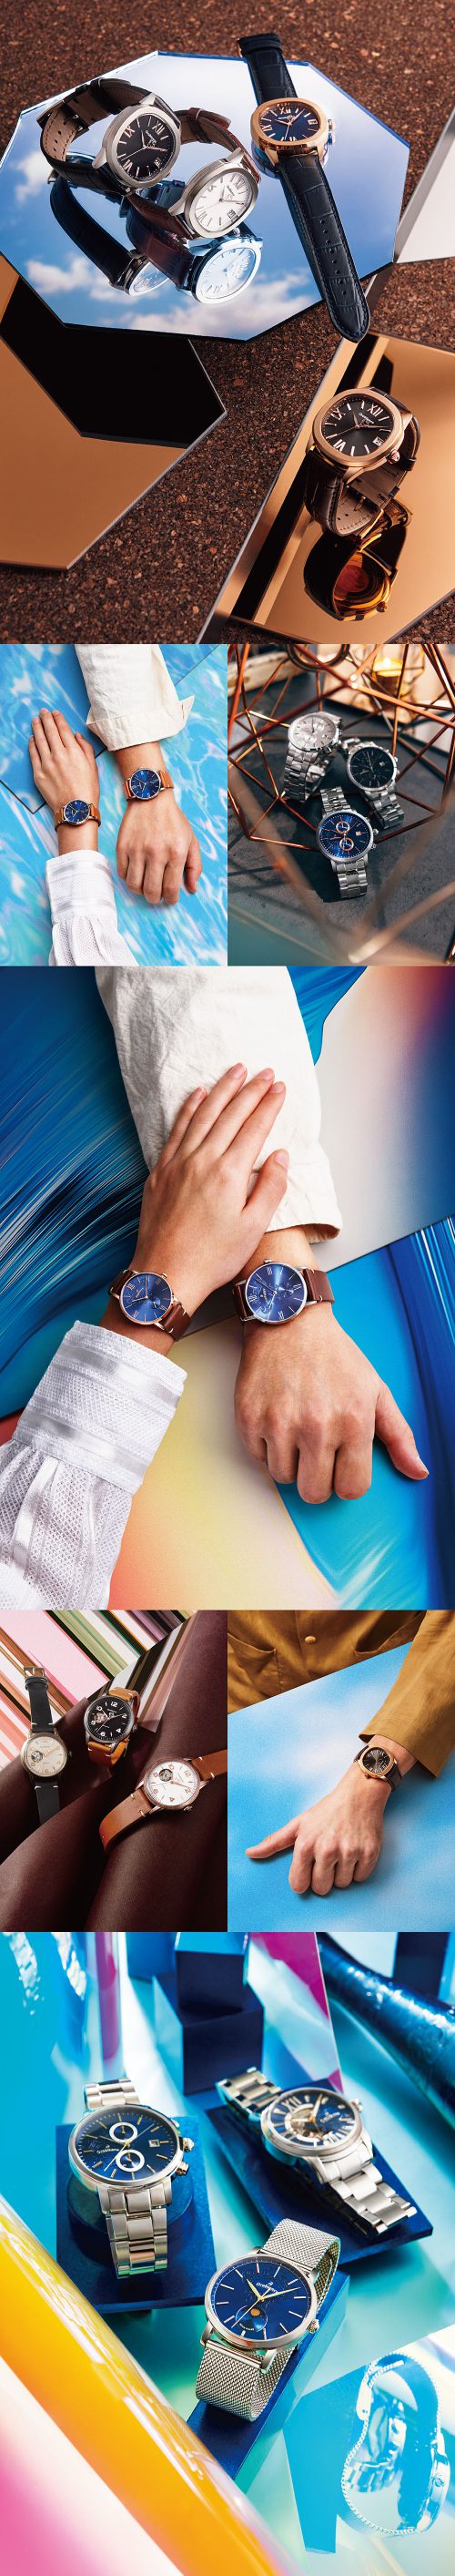 OROBIANCO / 2020 SPRING&SUMMER WATCH COLLECTION